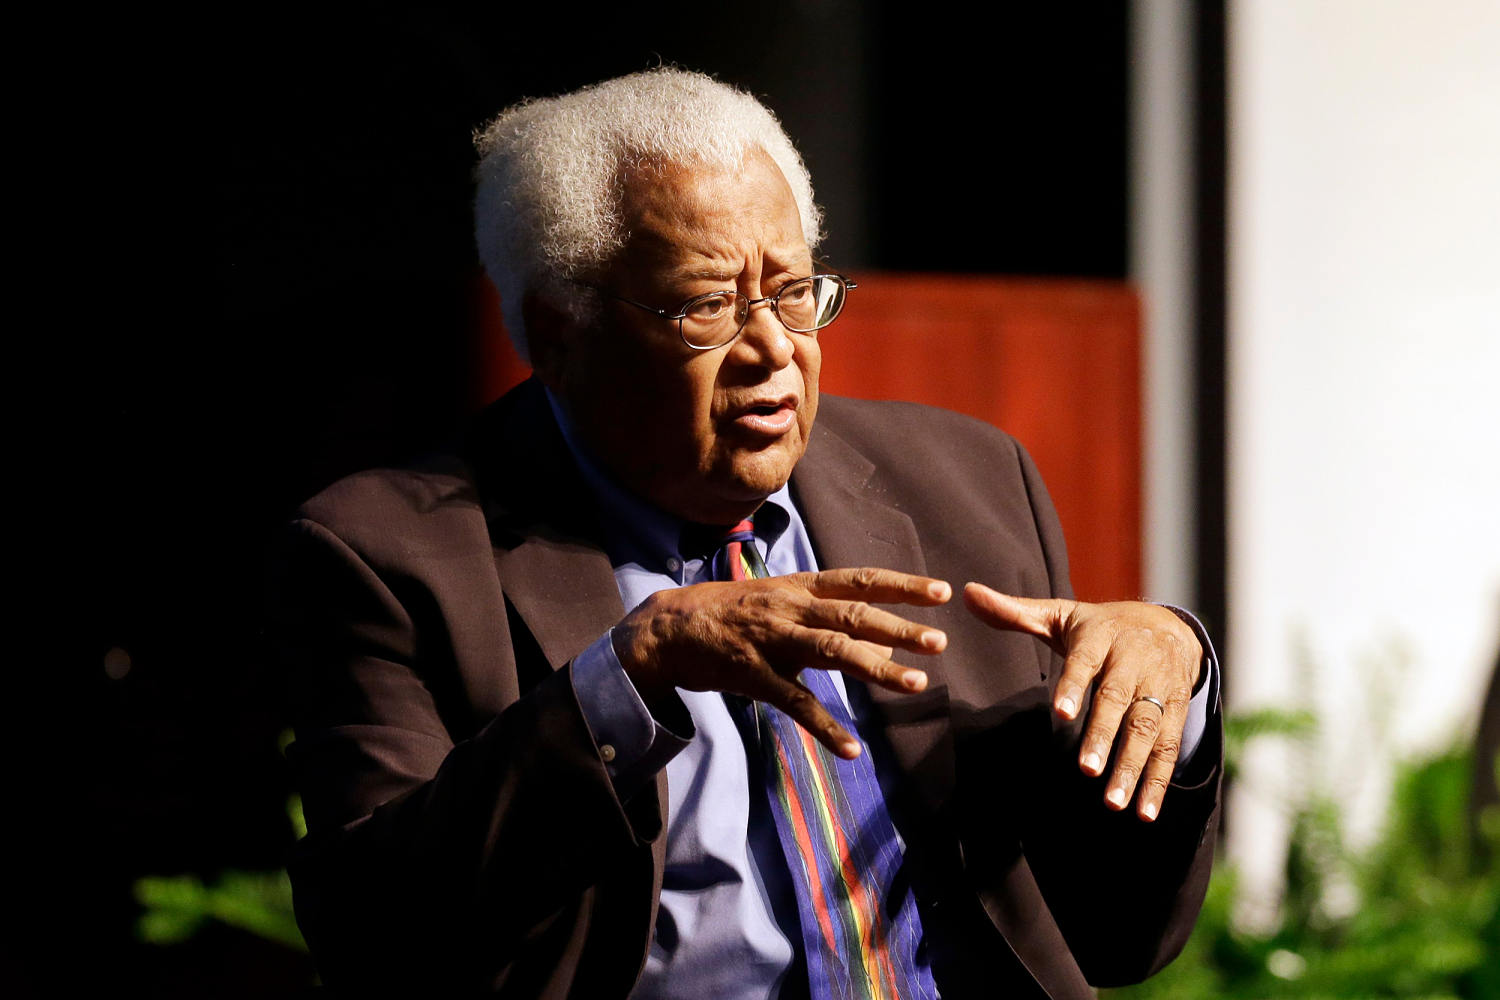 James Lawson Jr., civil rights leader who advocated for nonviolent protest, dies at 95